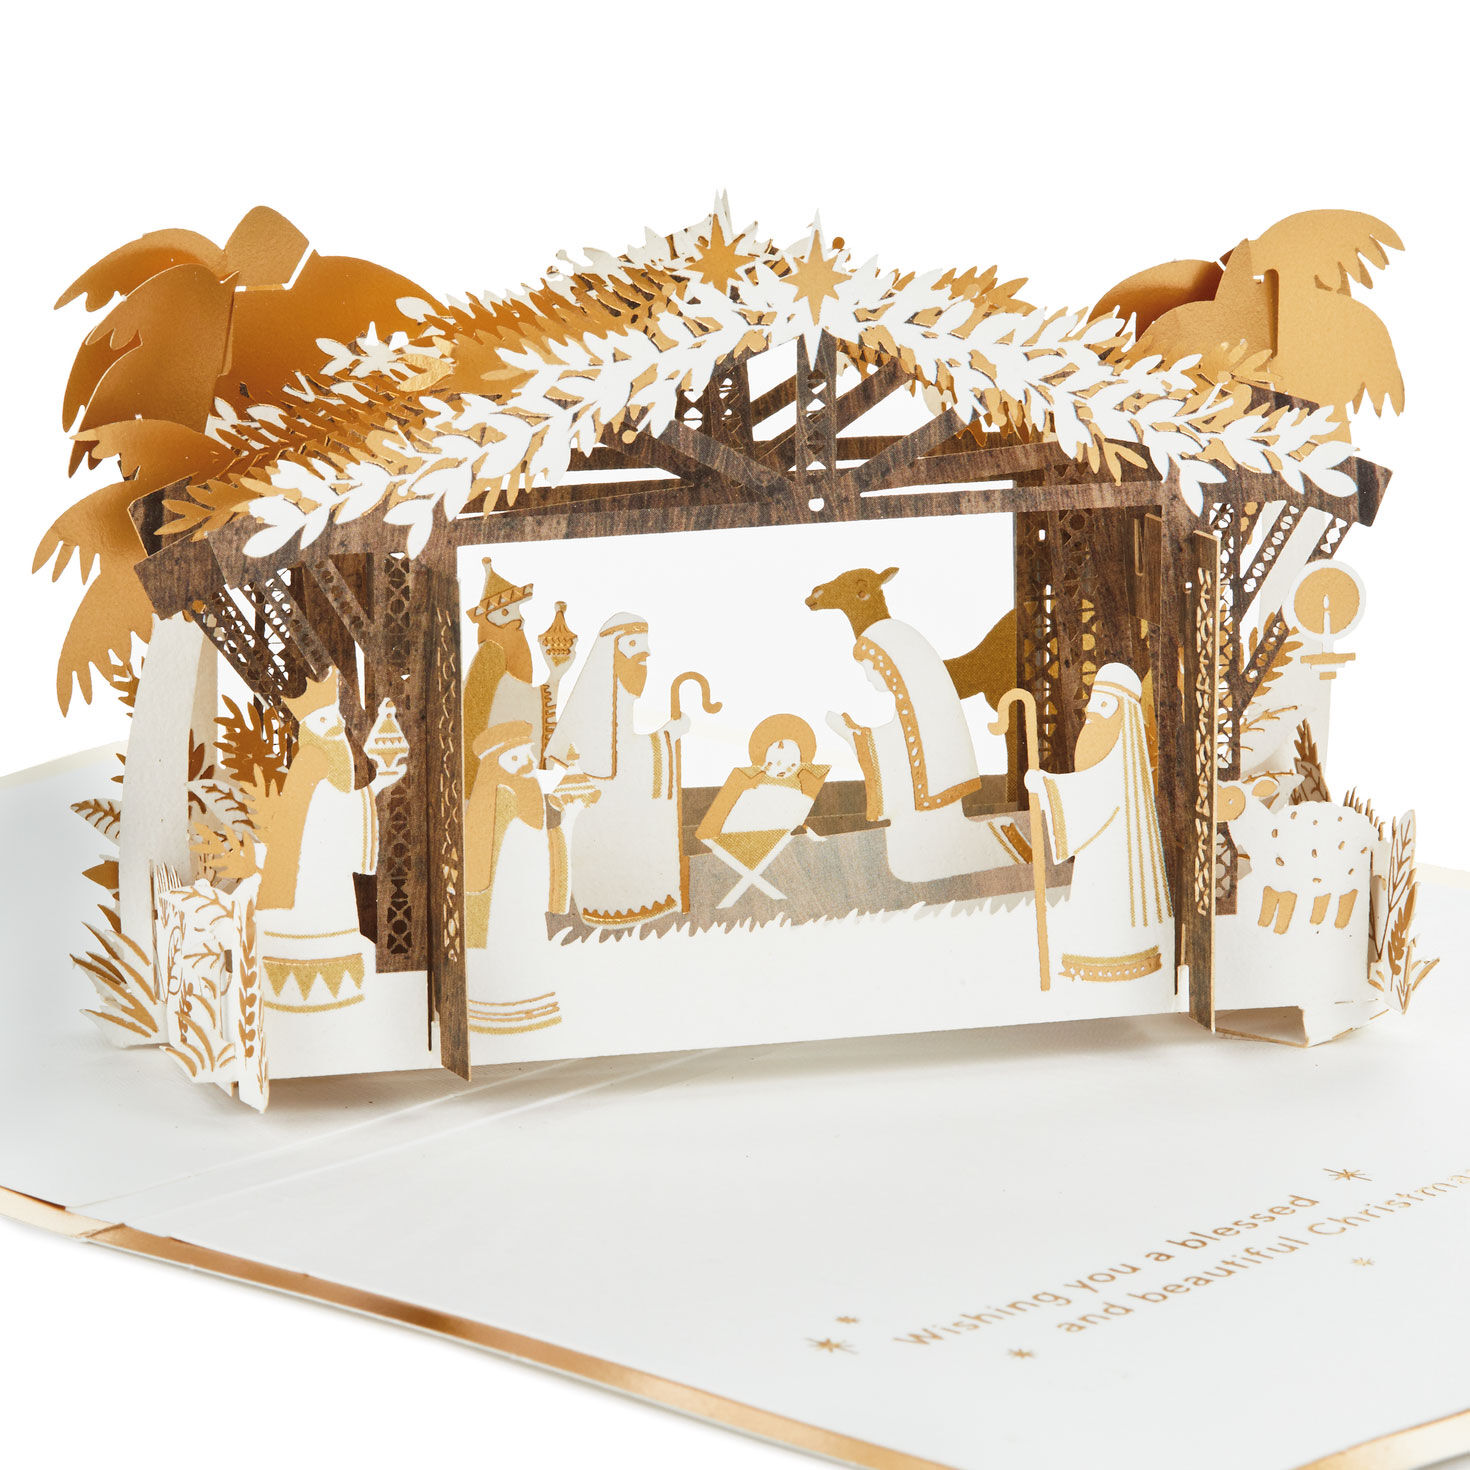 Details about   Southern Living At Home Christmas Nativity Ornament Keepsake Book NEW FREE SHIP 